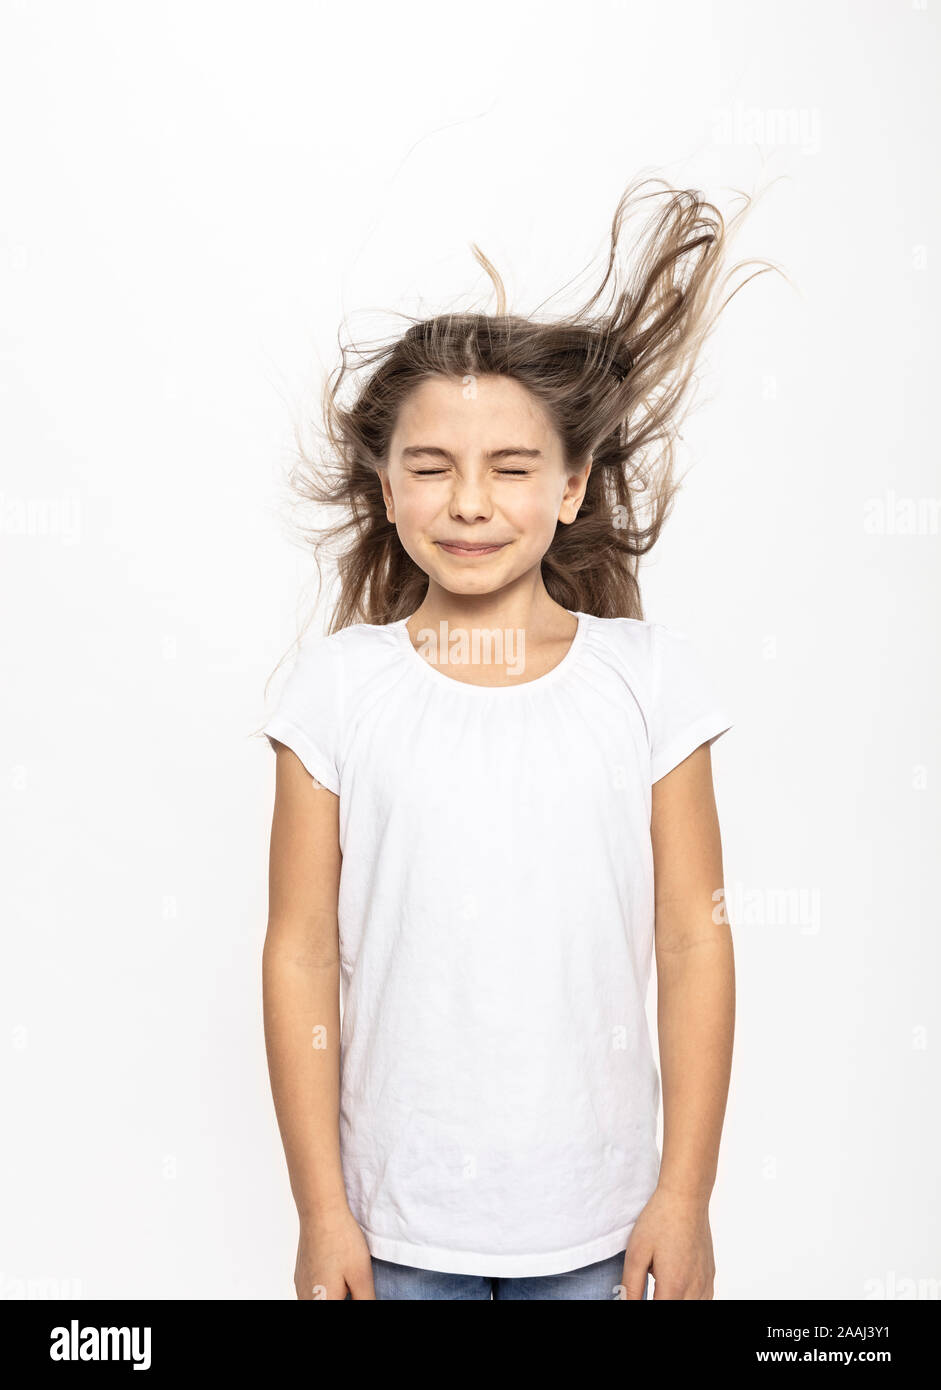 Girl with flying hair, white background Stock Photo